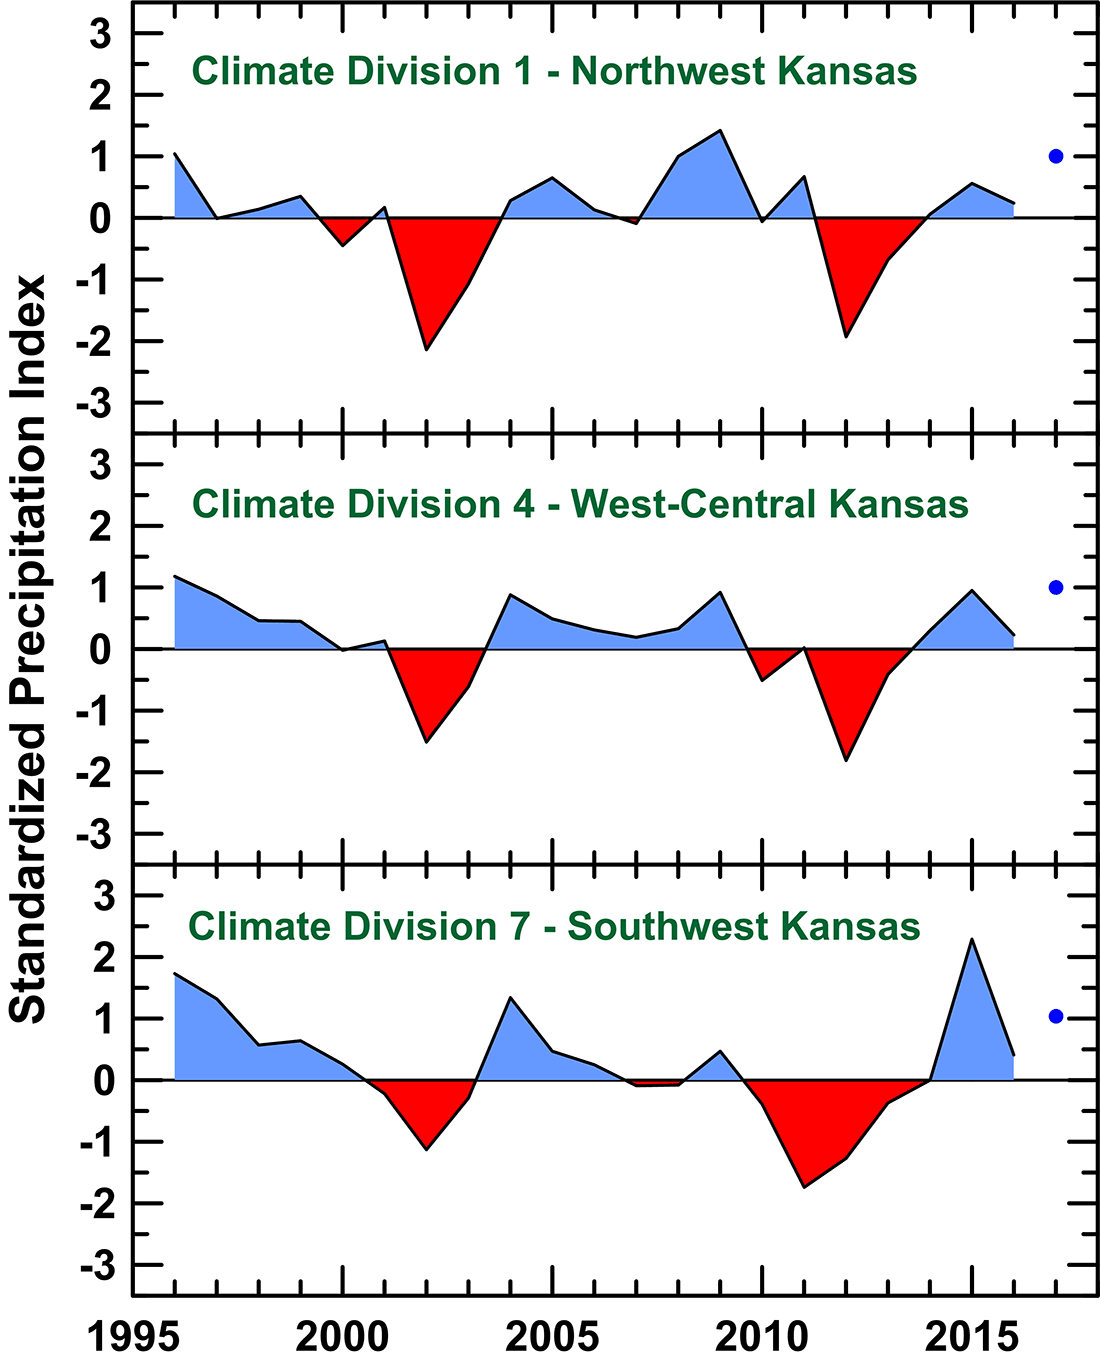 Standardized Precipitation Index for the 12-month period ending in December for the three western climatic divisions in Kansas in the Ogallala region of the High Plains aquifer.